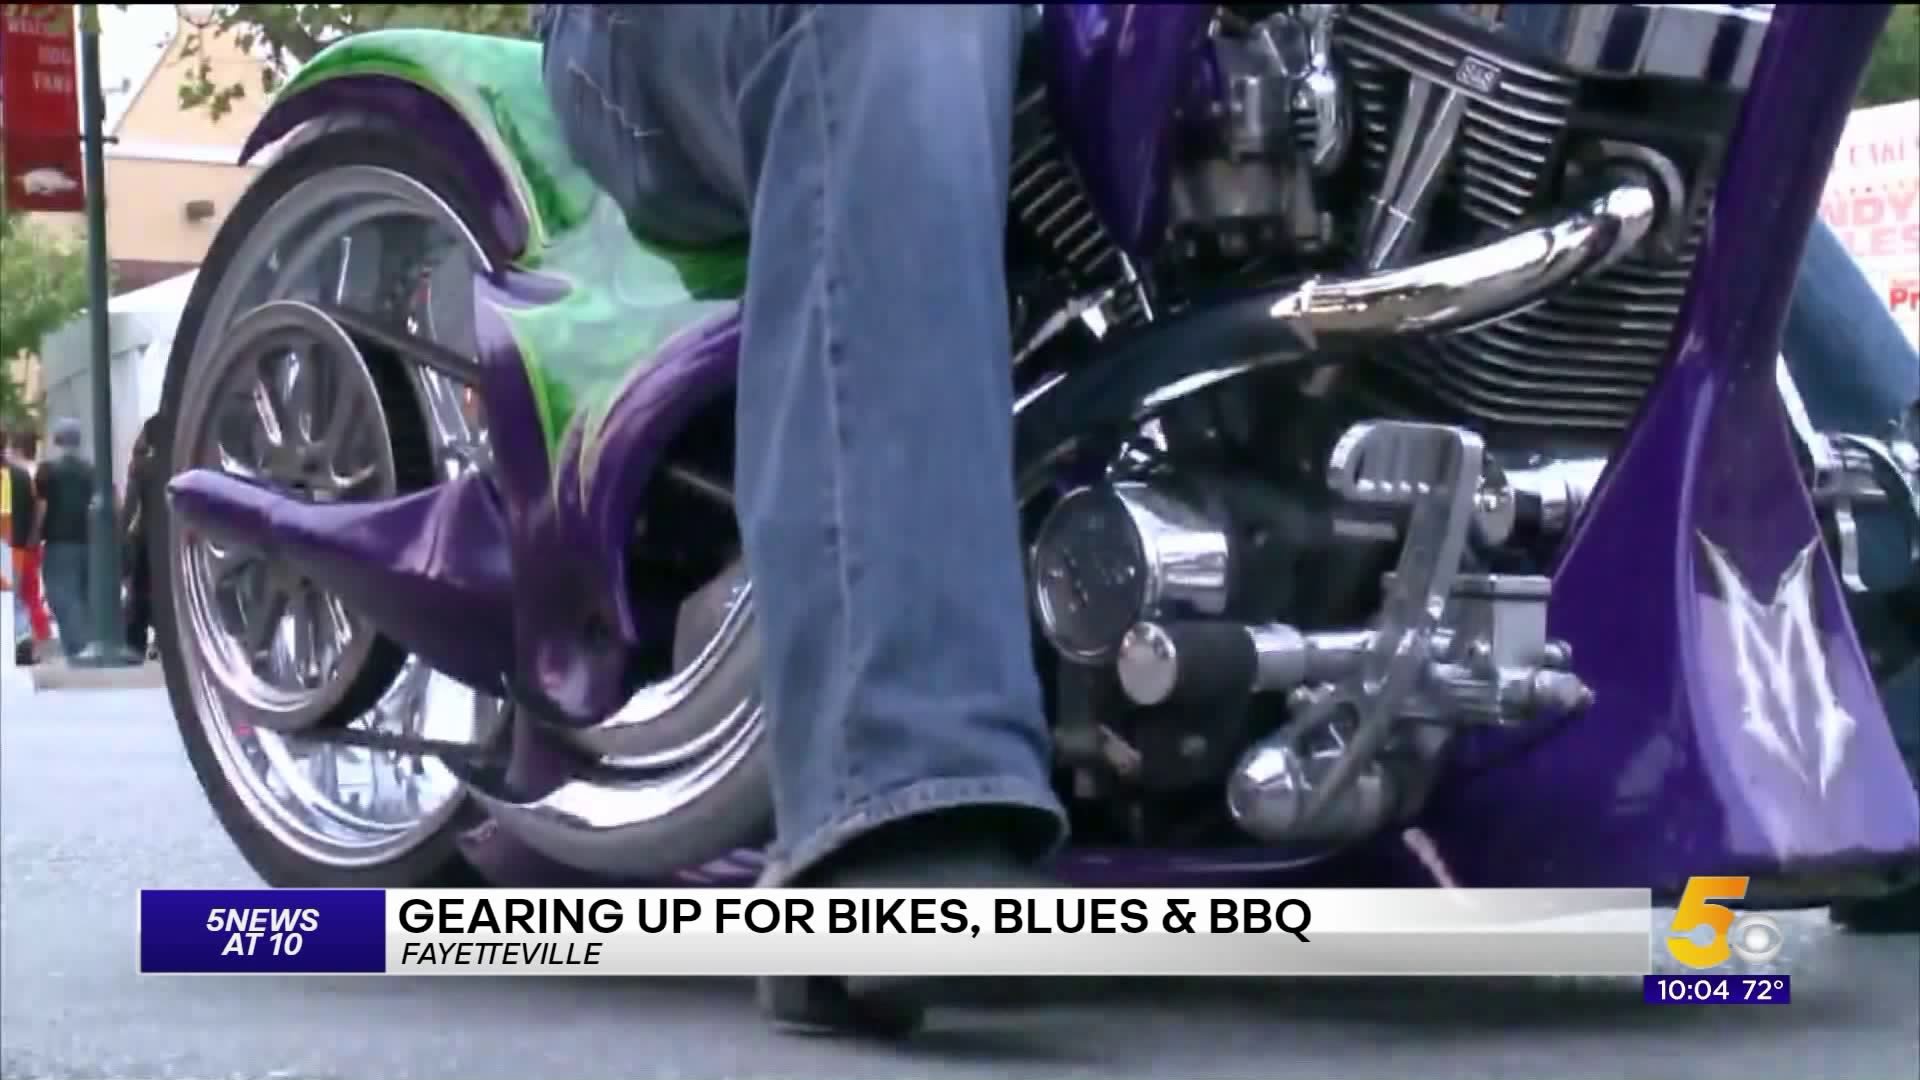 Gearing Up for Bikes, Blues & BBQ